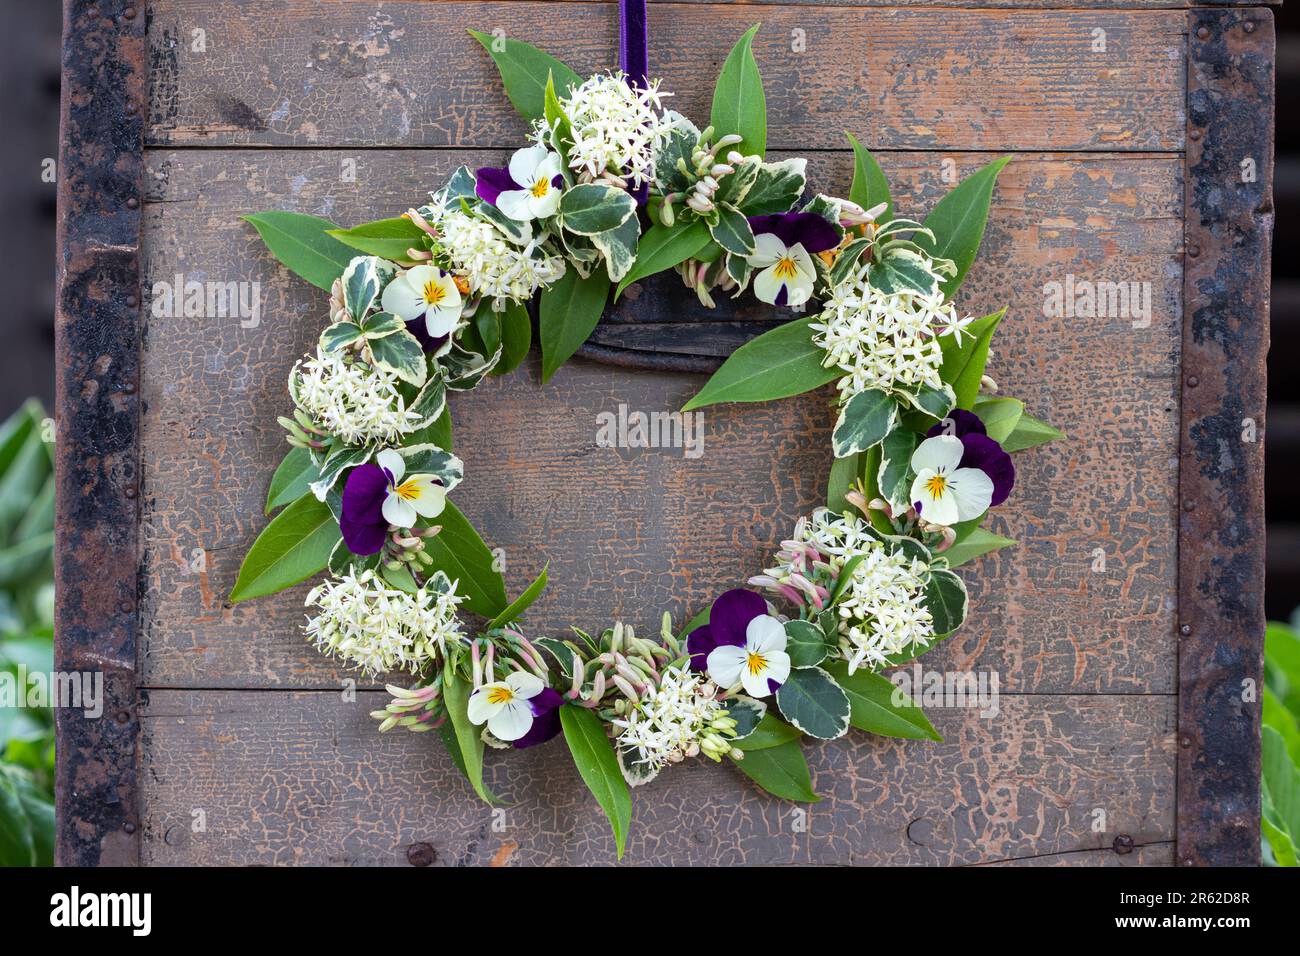 wreath of viola flowers, flowers of Siberian dogwood and honeysuckle hanging wooden box Stock Photo